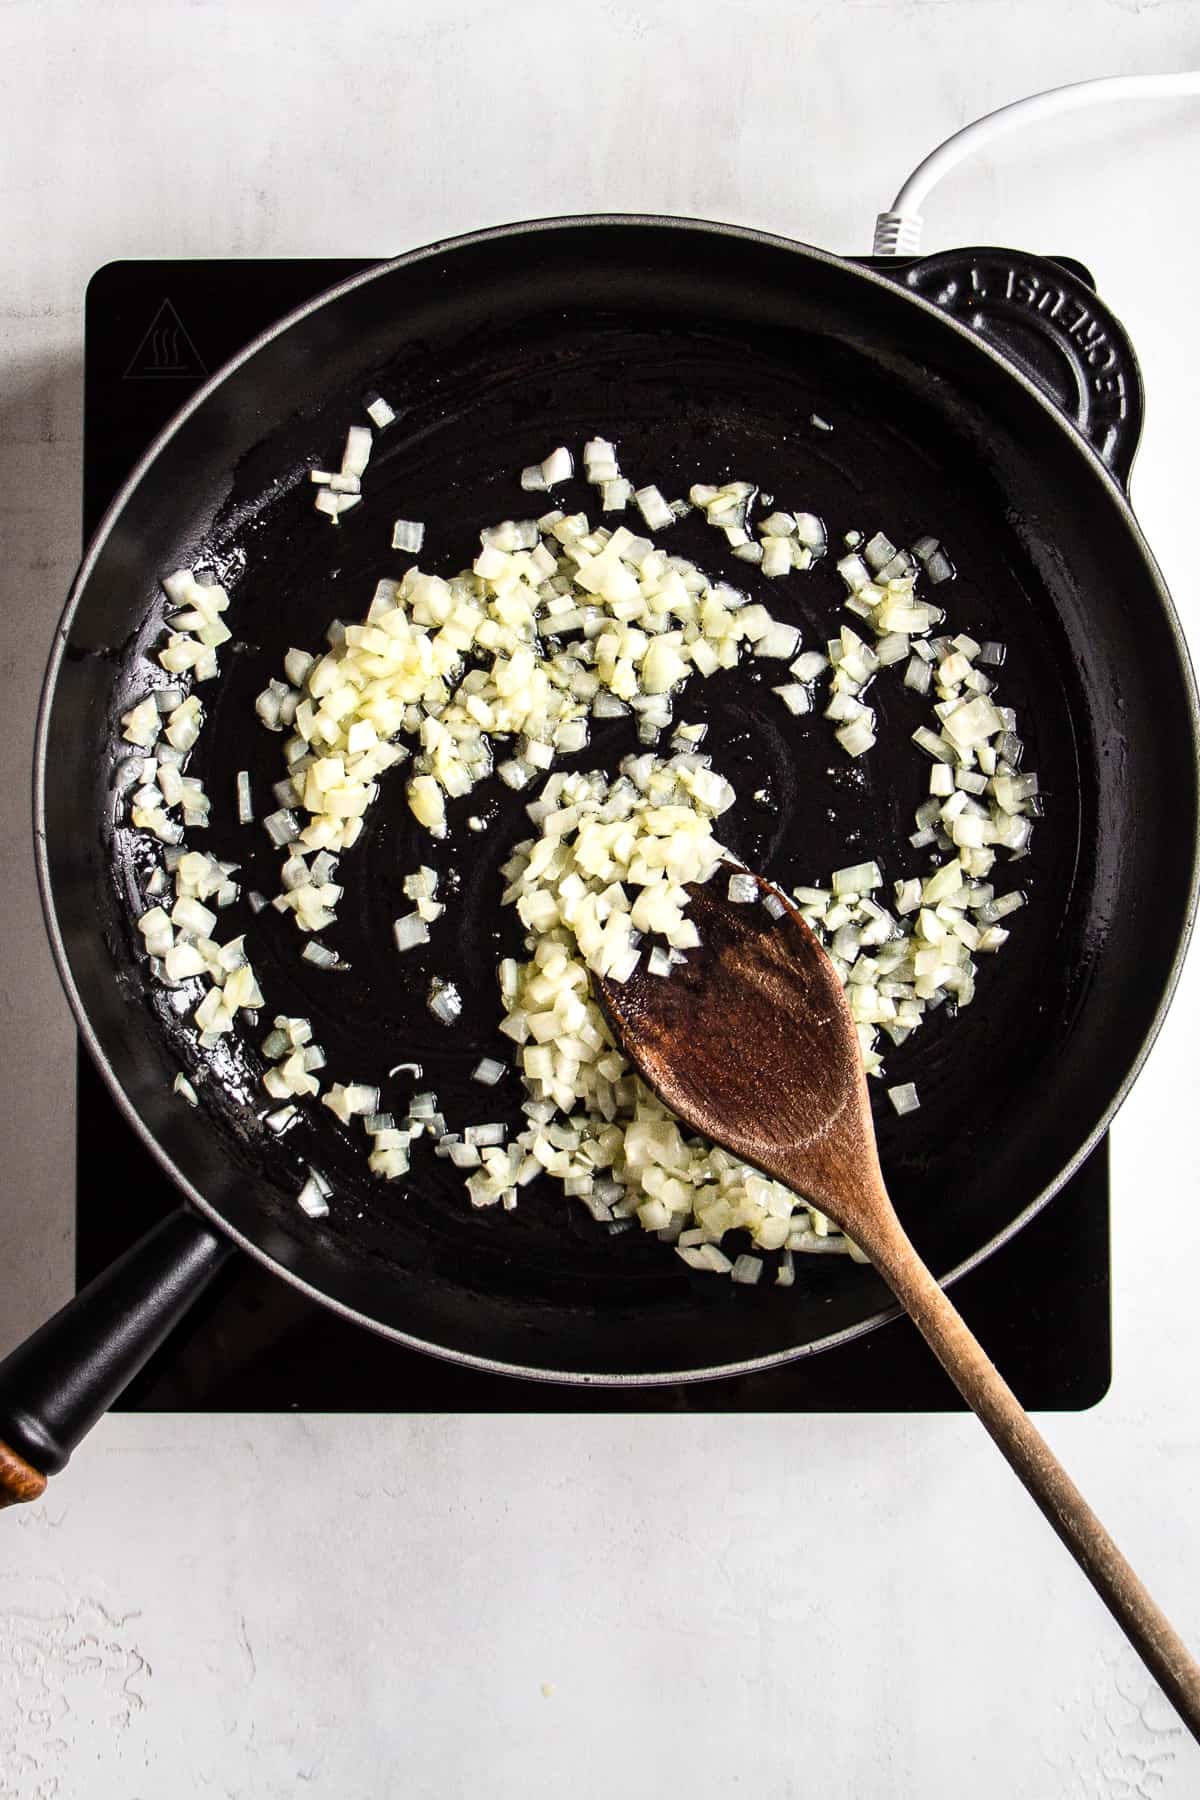 Sauteed onion and garlic in a black pan on a portable electric stove.